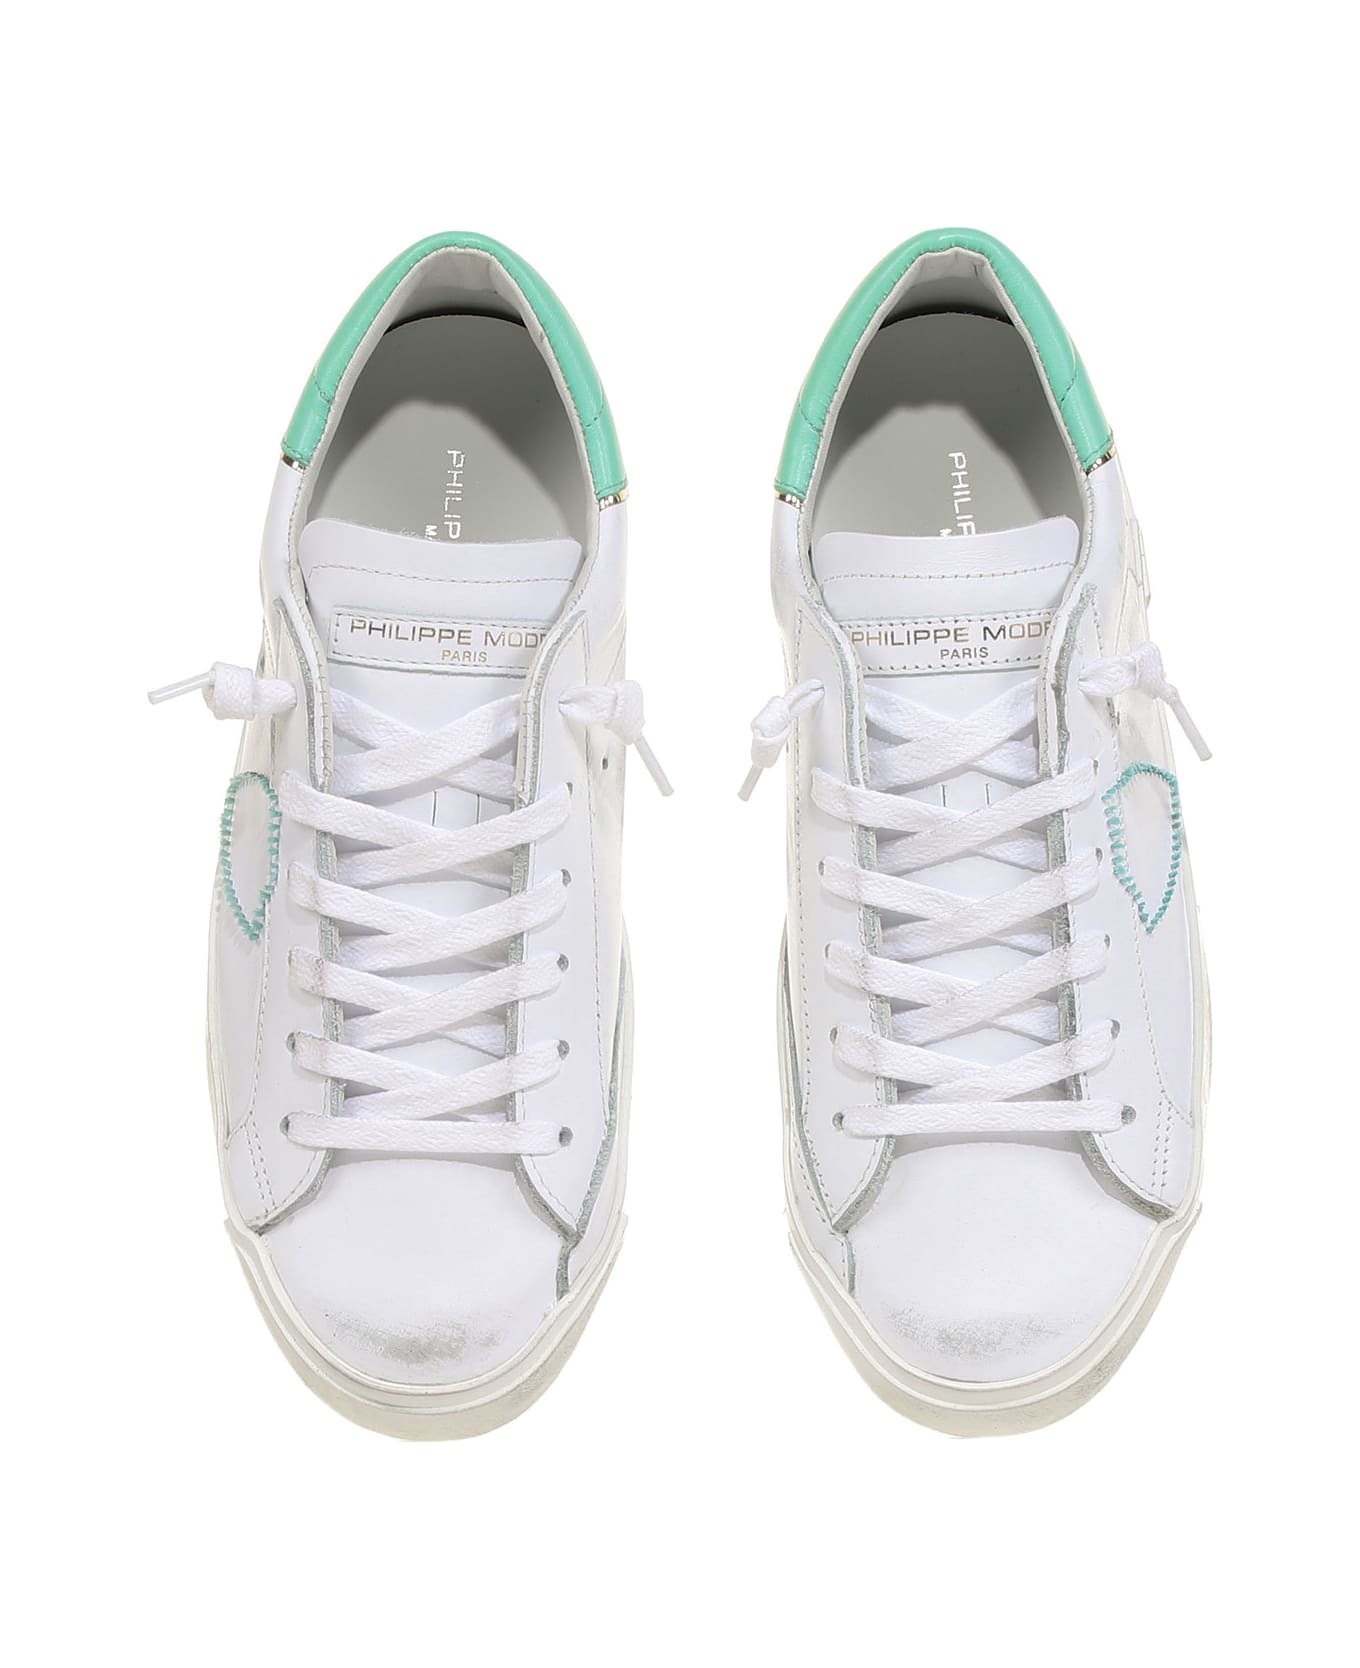 Philippe Model Sneaker With Contrasting Details - BIANCO TIFFANY